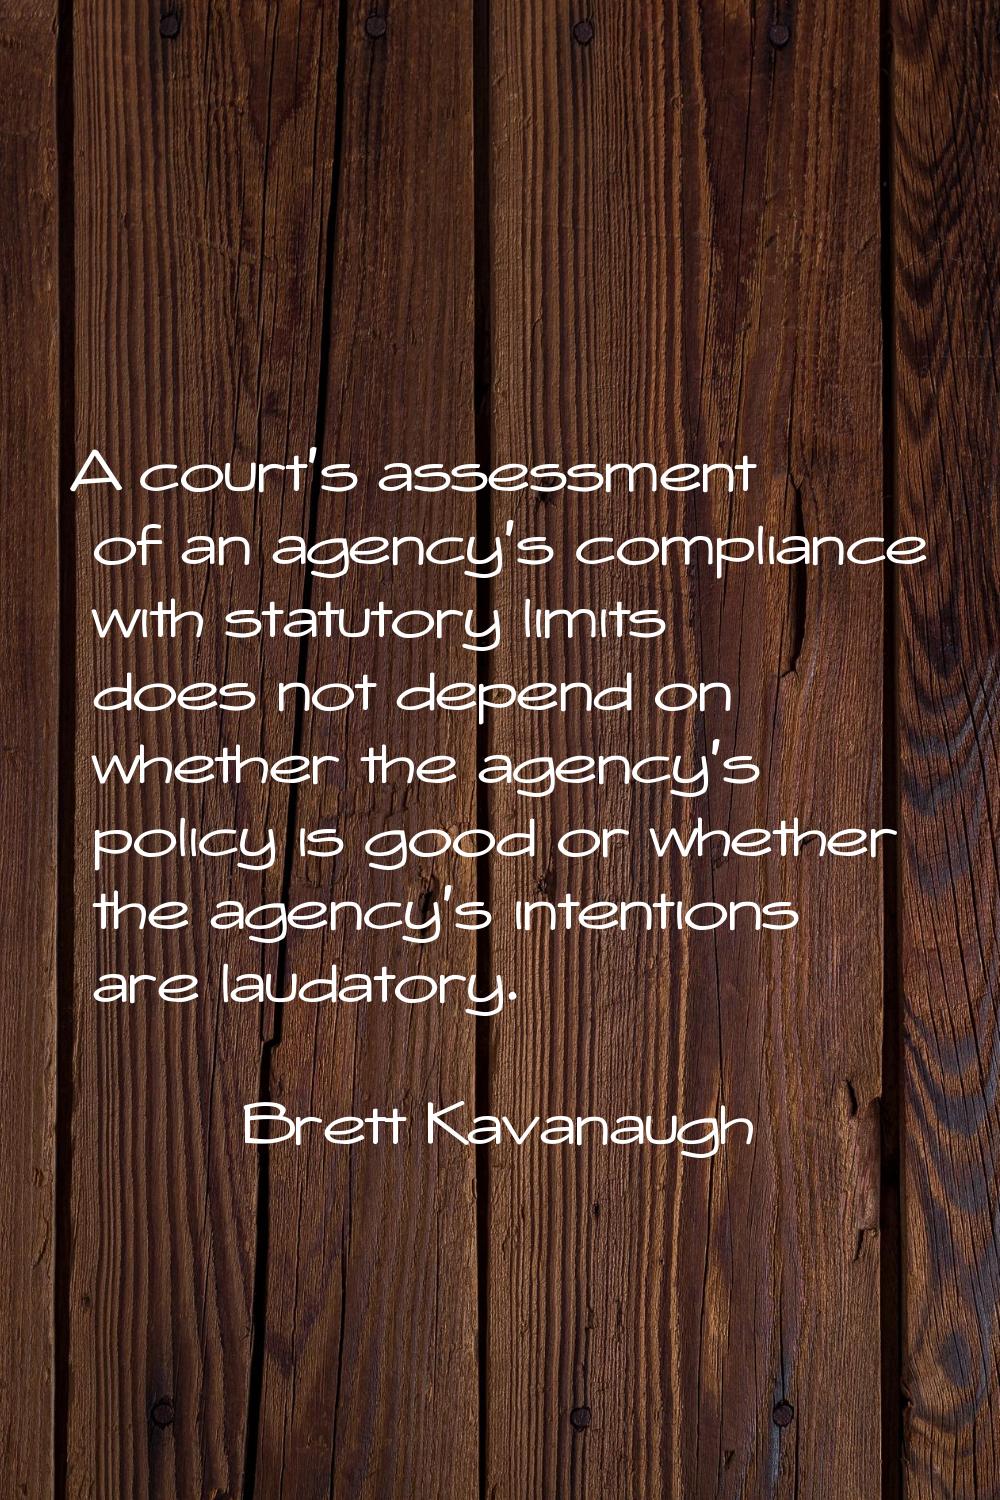 A court's assessment of an agency's compliance with statutory limits does not depend on whether the